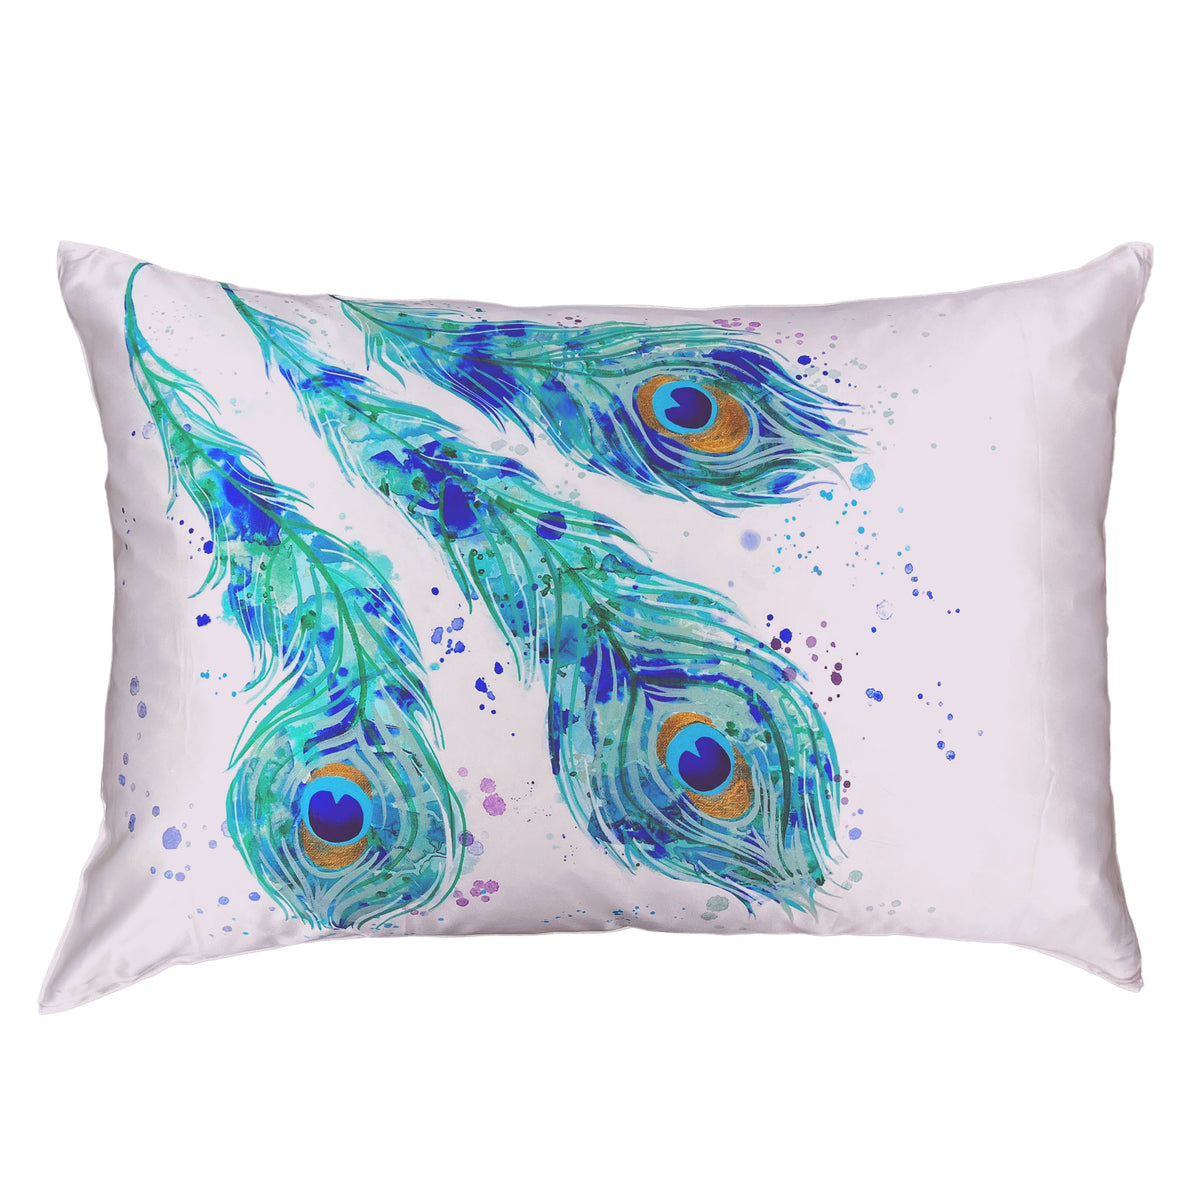 Mulberry Park Silks Peacock Feathers Silk Pillowcase King Size